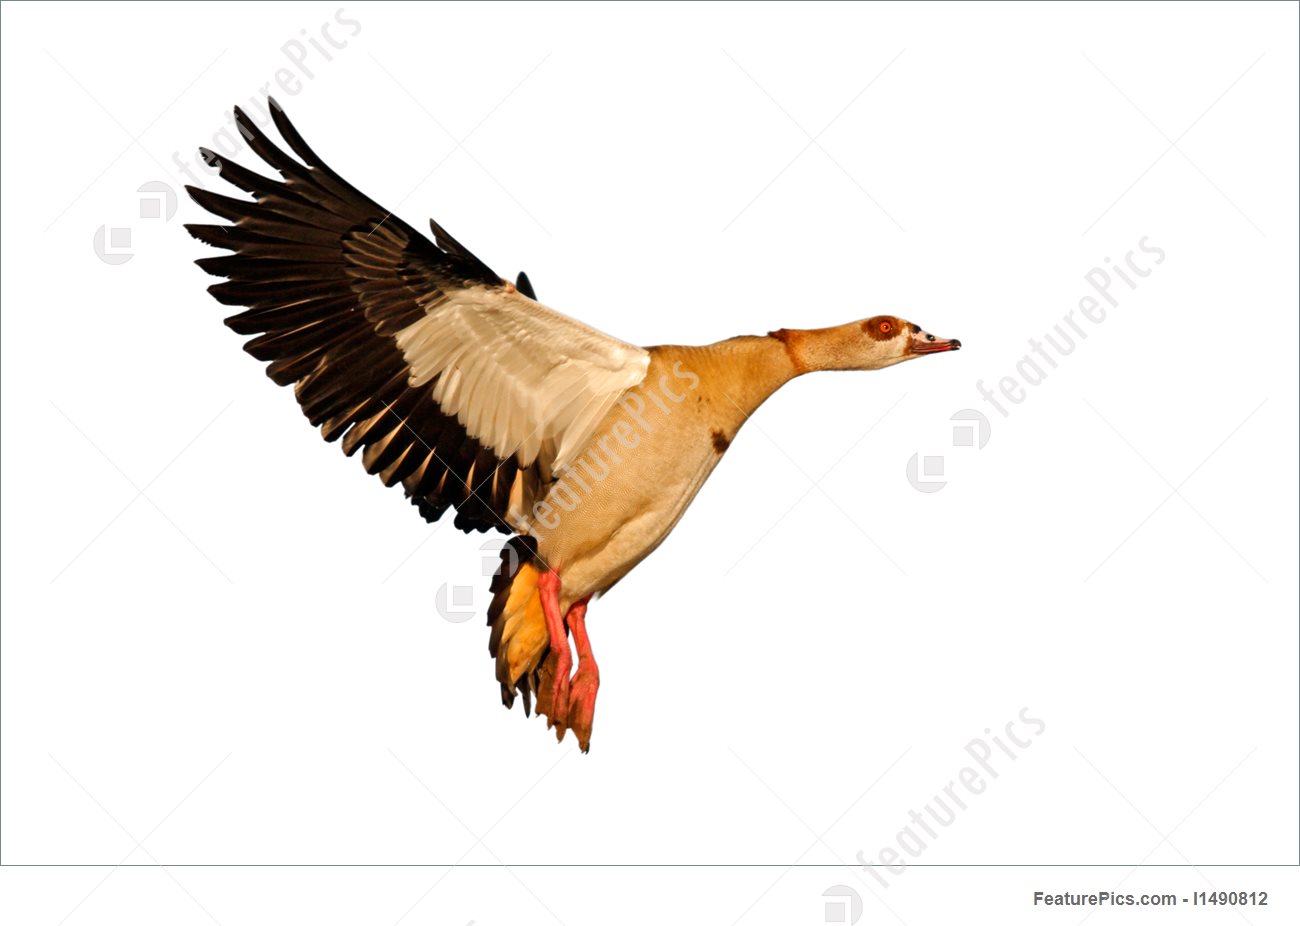 Egyptian Goose clipart #6, Download drawings